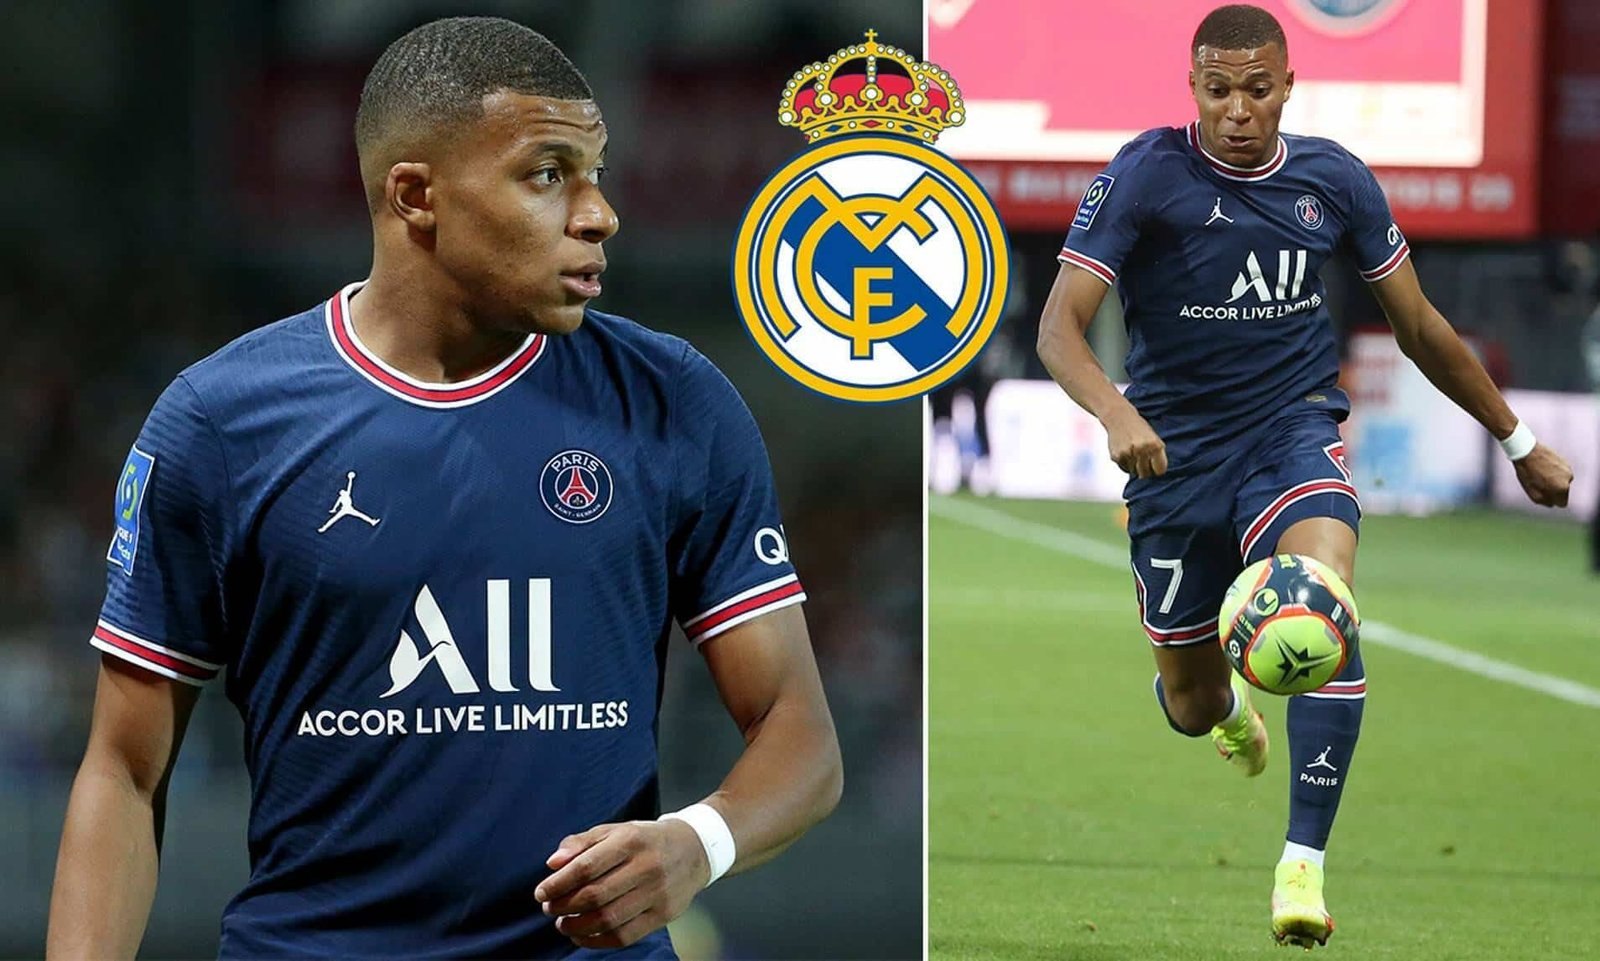 The transfer saga of Mbappe, from PSG to Real Madrid still hangs on the balance